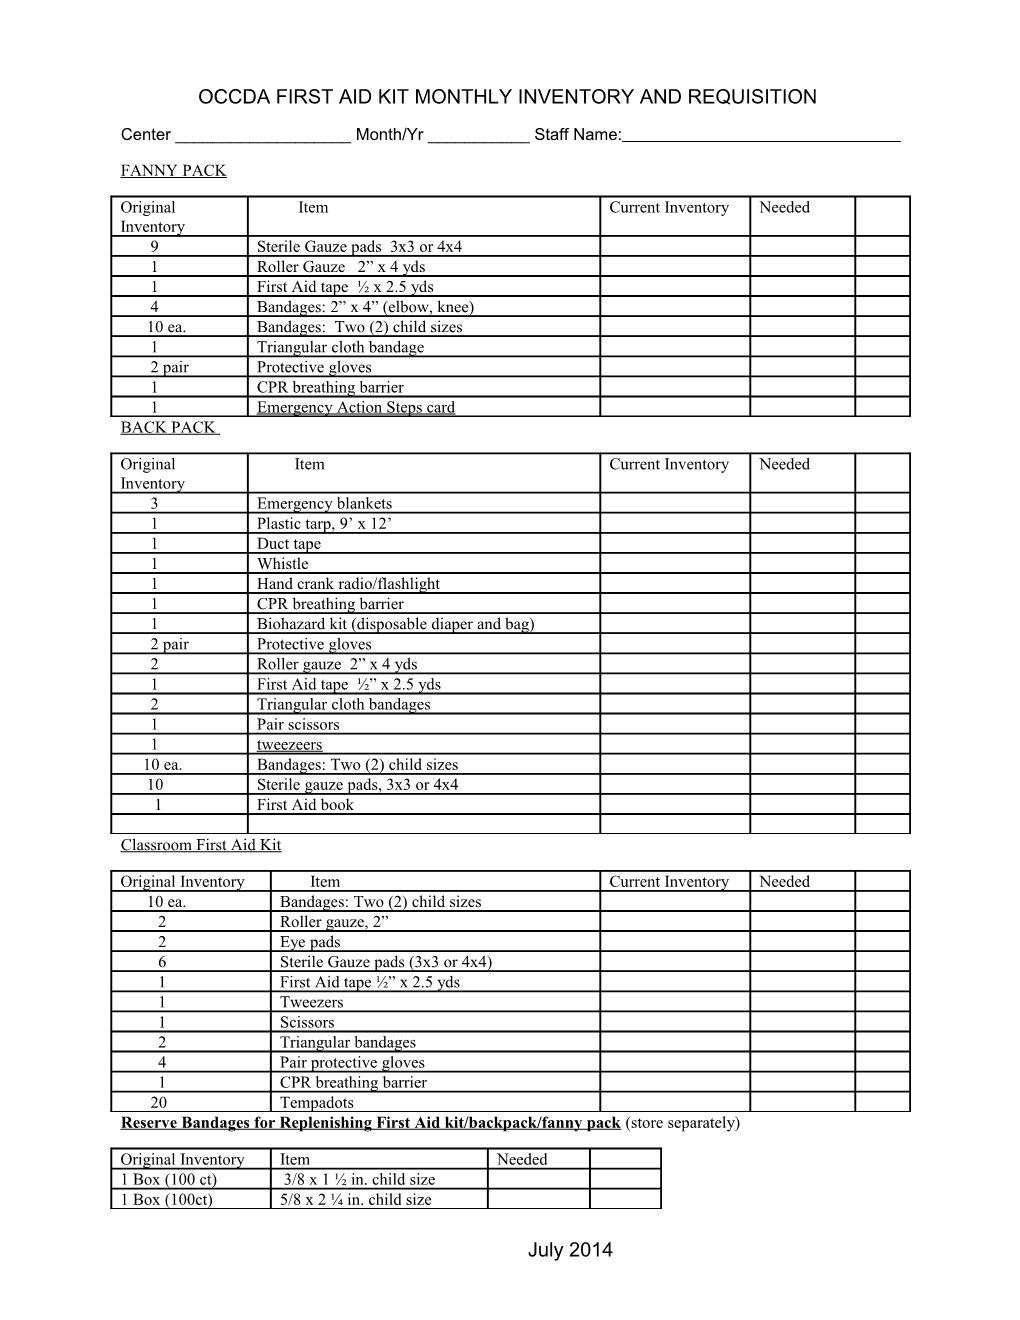 Occda First Aid Kit Monthly Inventory and Requisition